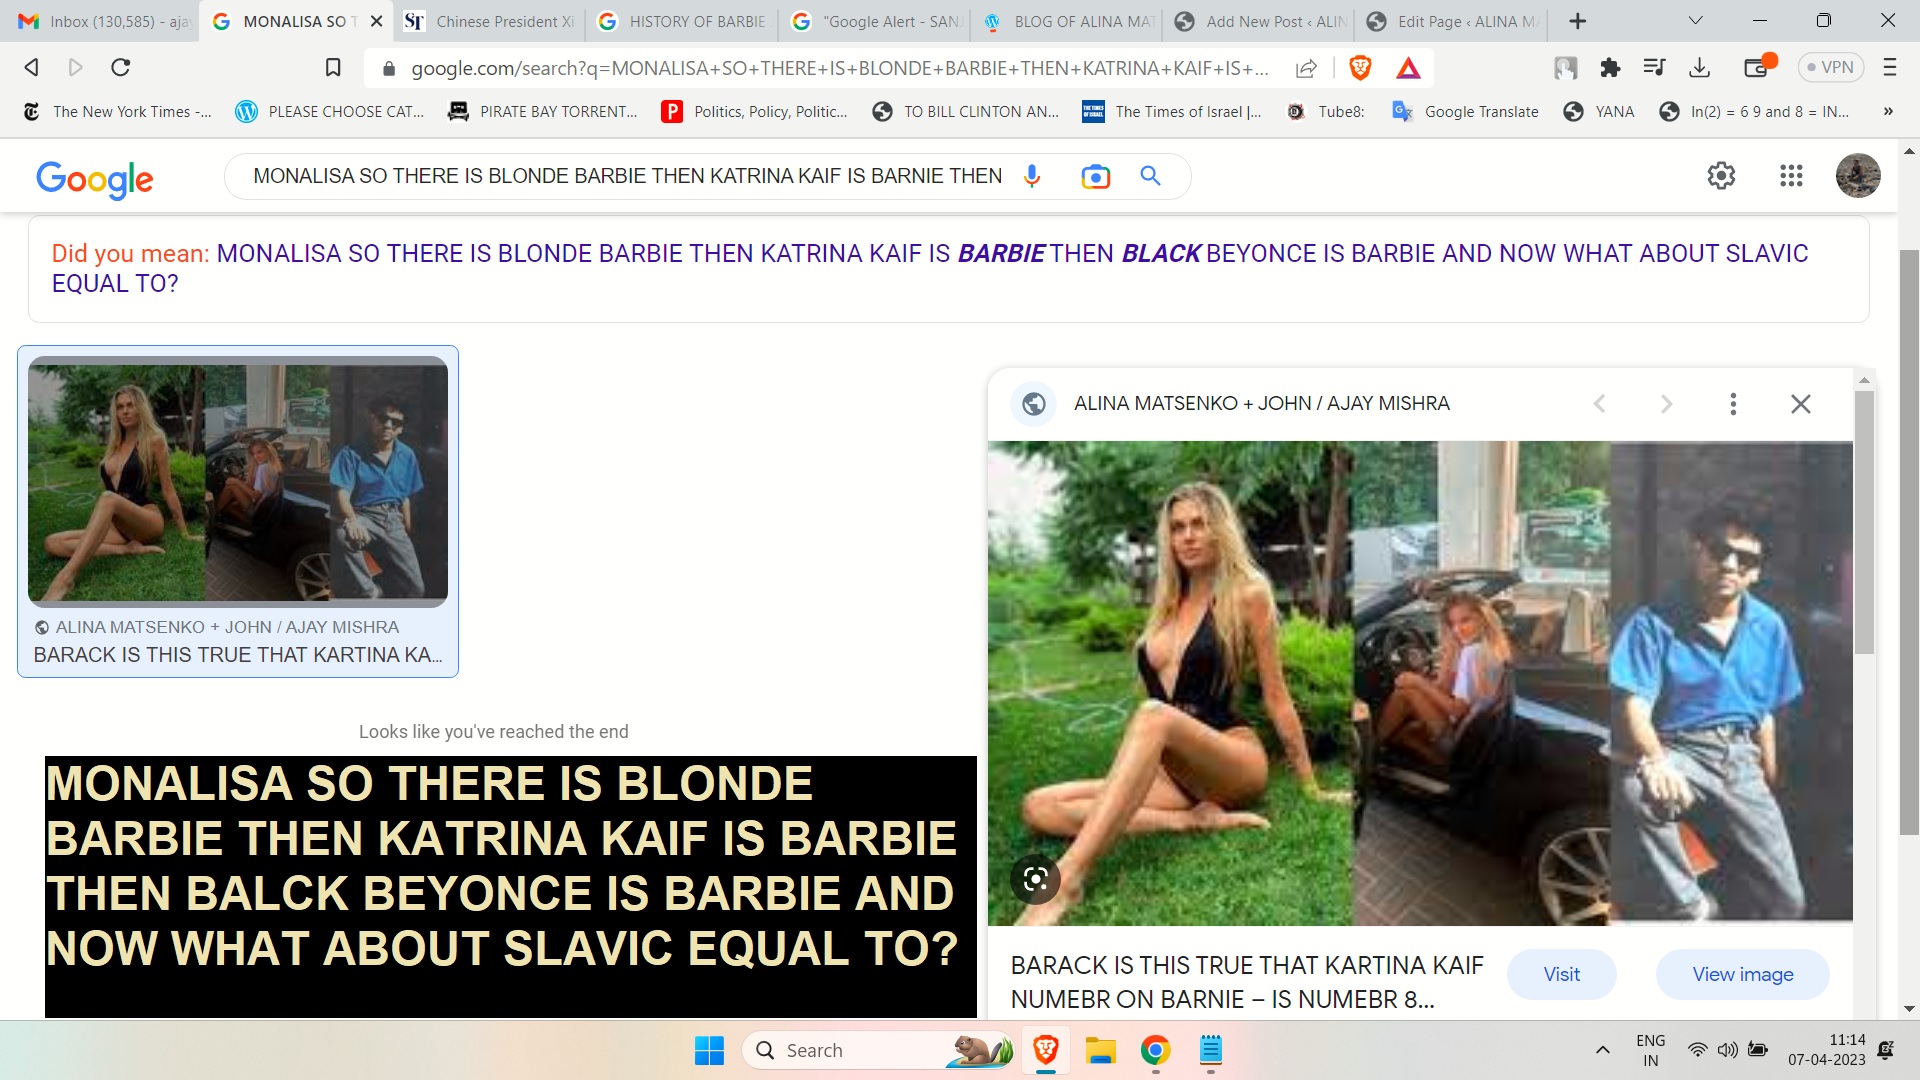 MONALISA SO THERE IS BLONDE BARBIE THEN KATRINA KAIF IS BARBIE THEN BALCK BEYONCE IS BARBIE AND NOW WHAT ABOUT SLAVIC EQUAL TO?